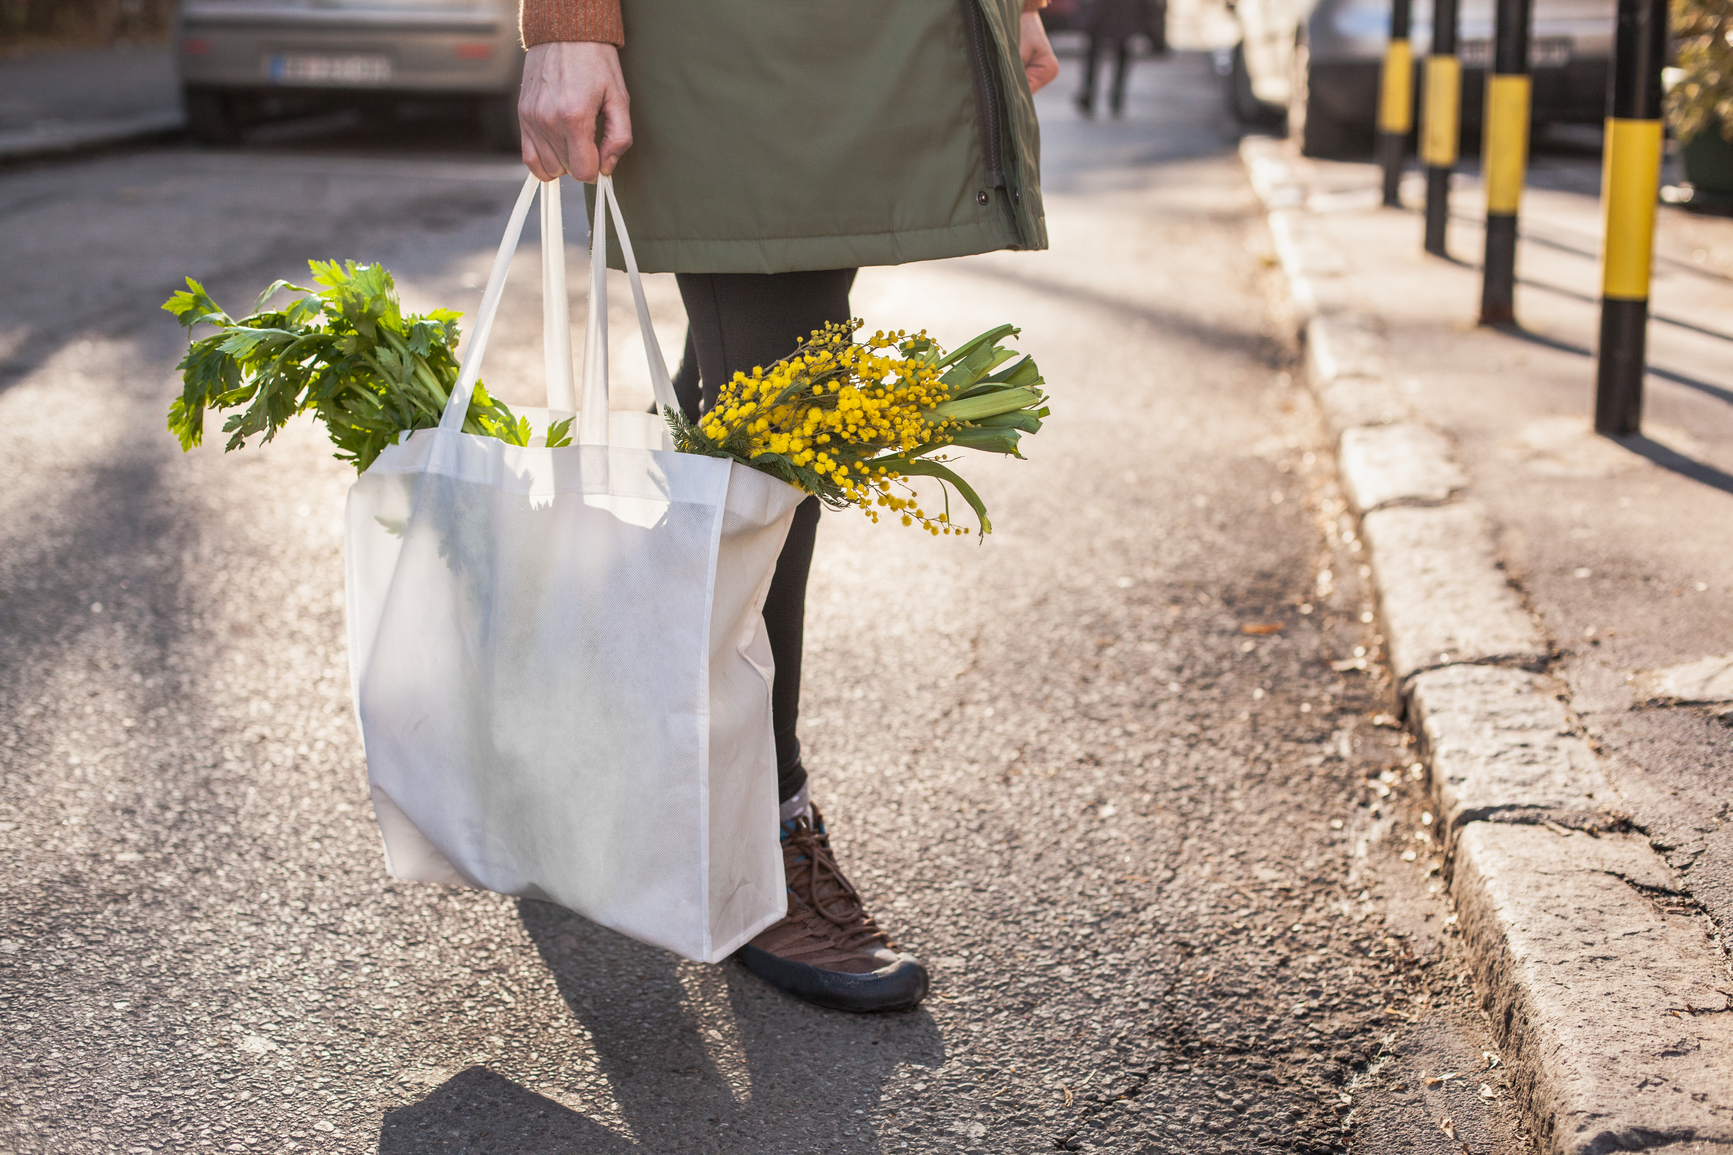 6 Things to Do with All Those Reusable Bags